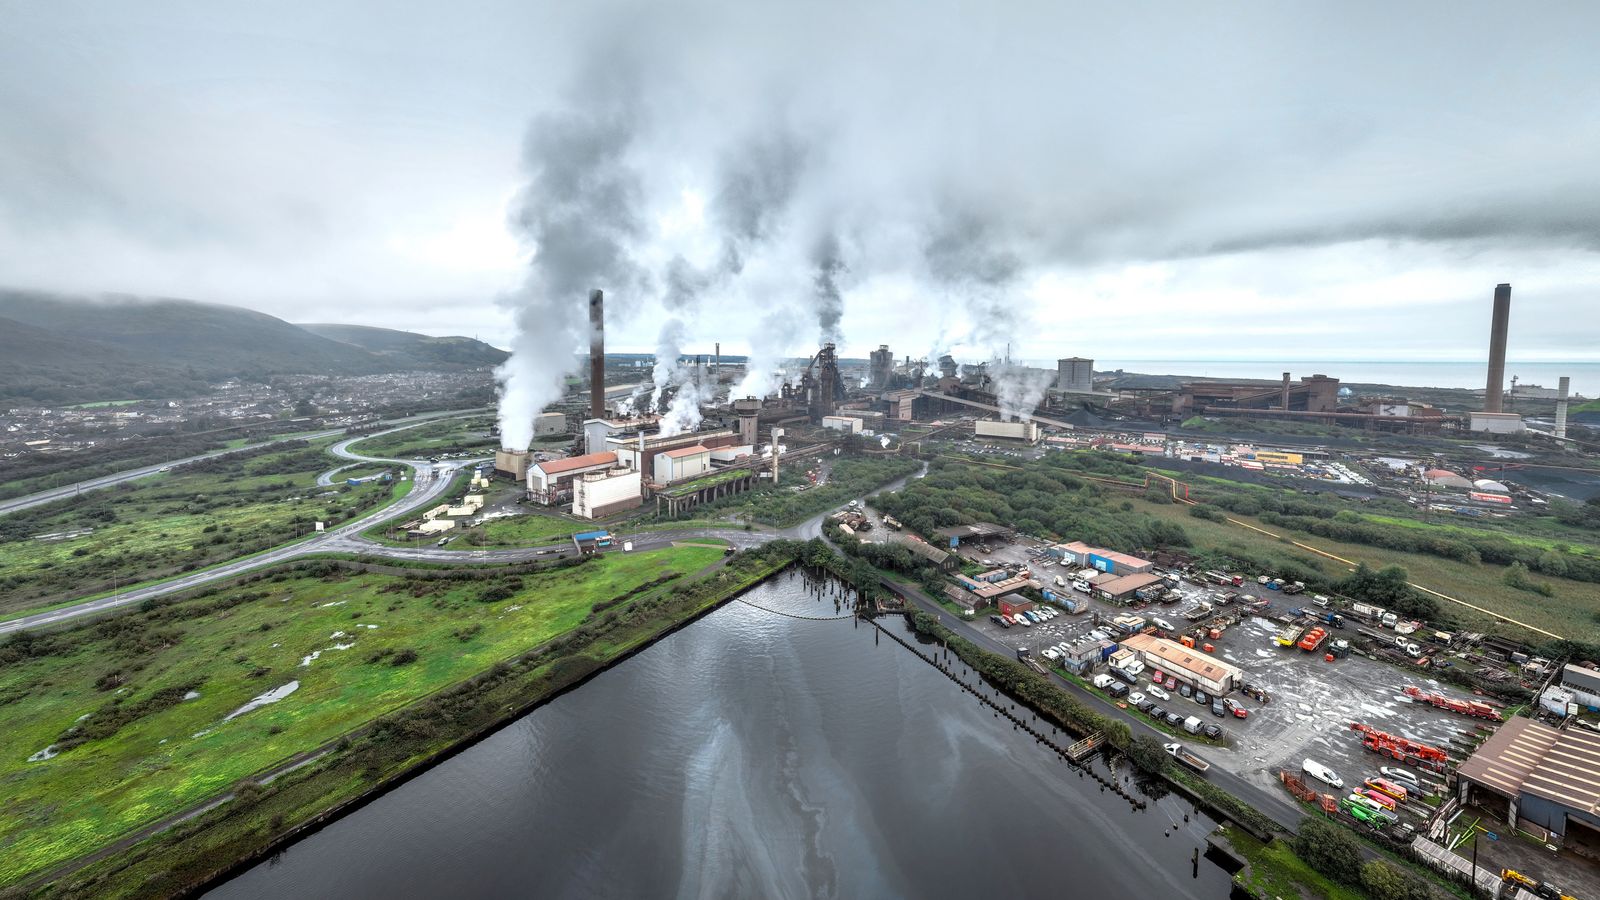 Unions vow to fight 'rejection' of plan to save Tata Steel jobs